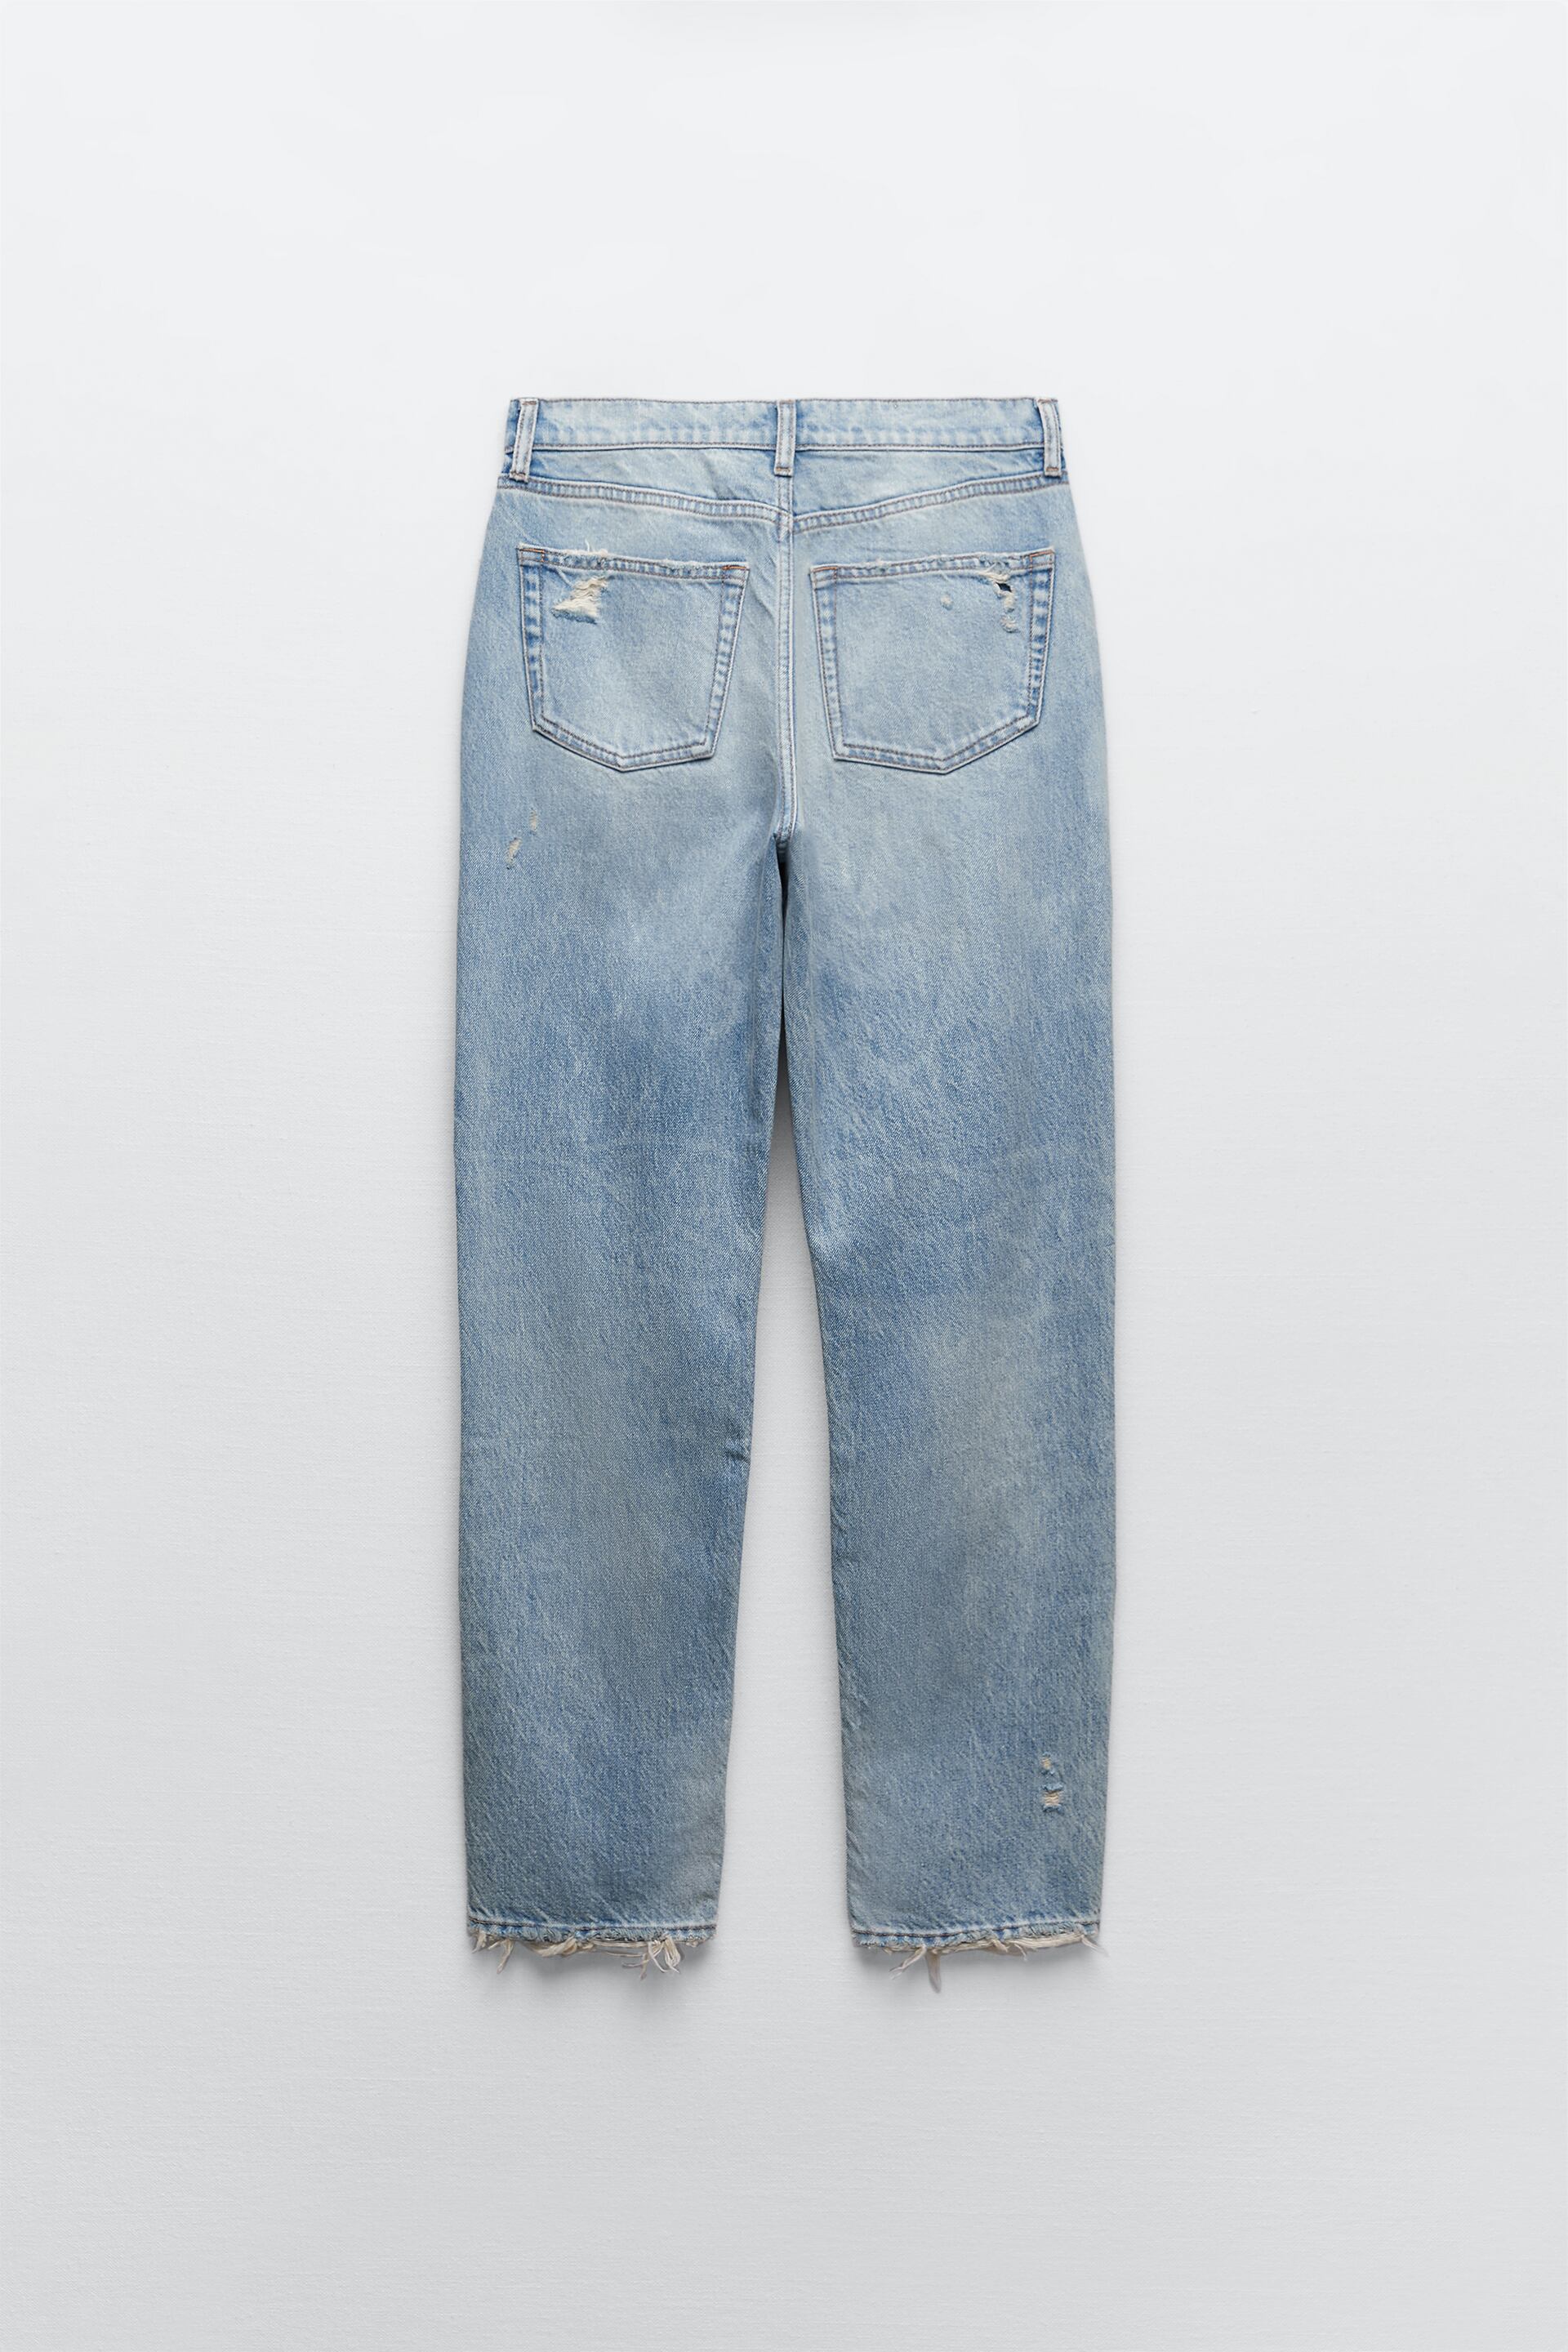 Cereal acceleration Riot ZW THE RELAXED SLIM BOYFRIEND JEANS - Blue | ZARA United States